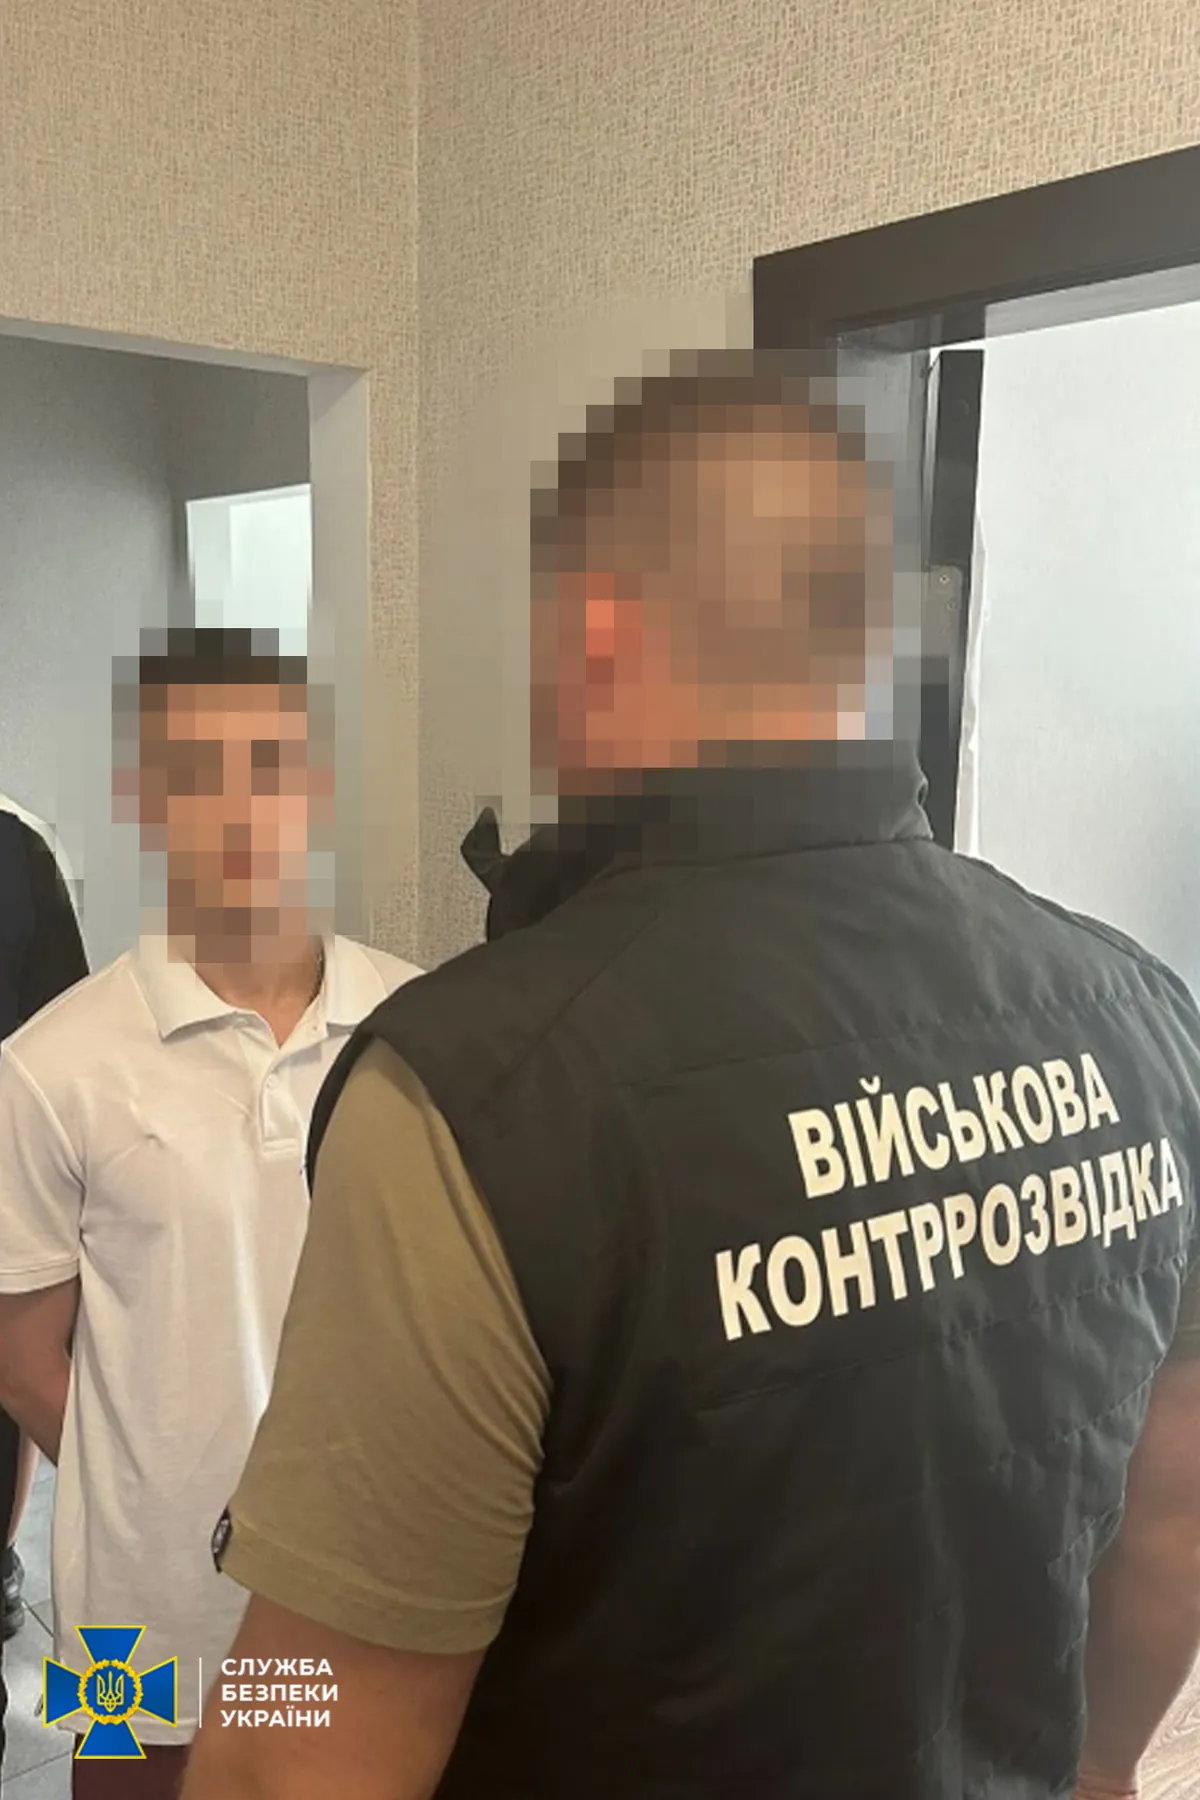 khmelnytskyi-region-detains-leader-of-gang-that-set-fire-to-tcc-cars-on-russias-order